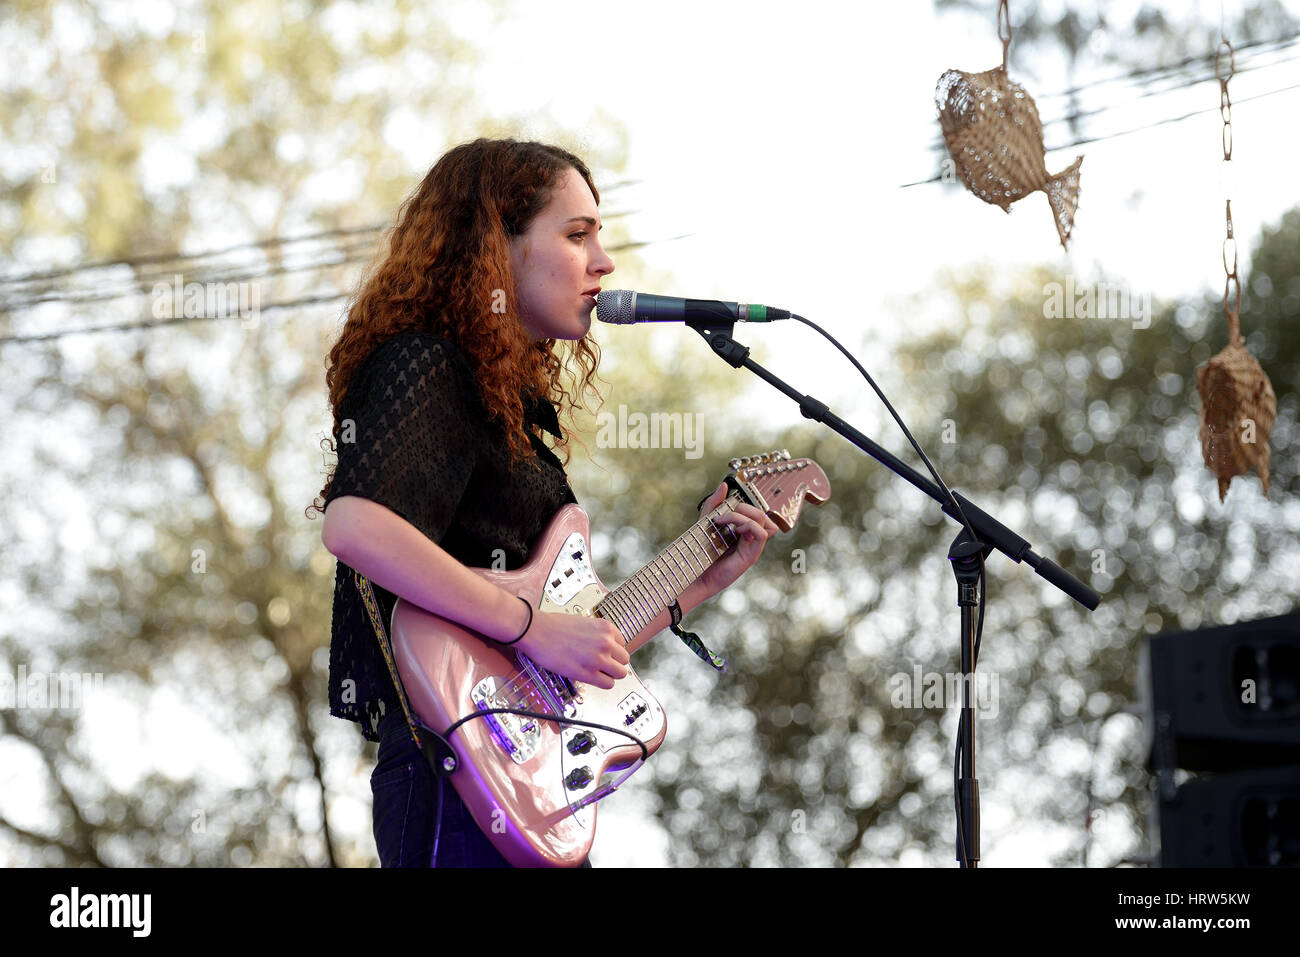 BARCELONA - JUL 4: Nuria Graham (singer and guitarist from Vic) performs at Vida Festival on July 4, 2015 in Barcelona, Spain. Stock Photo